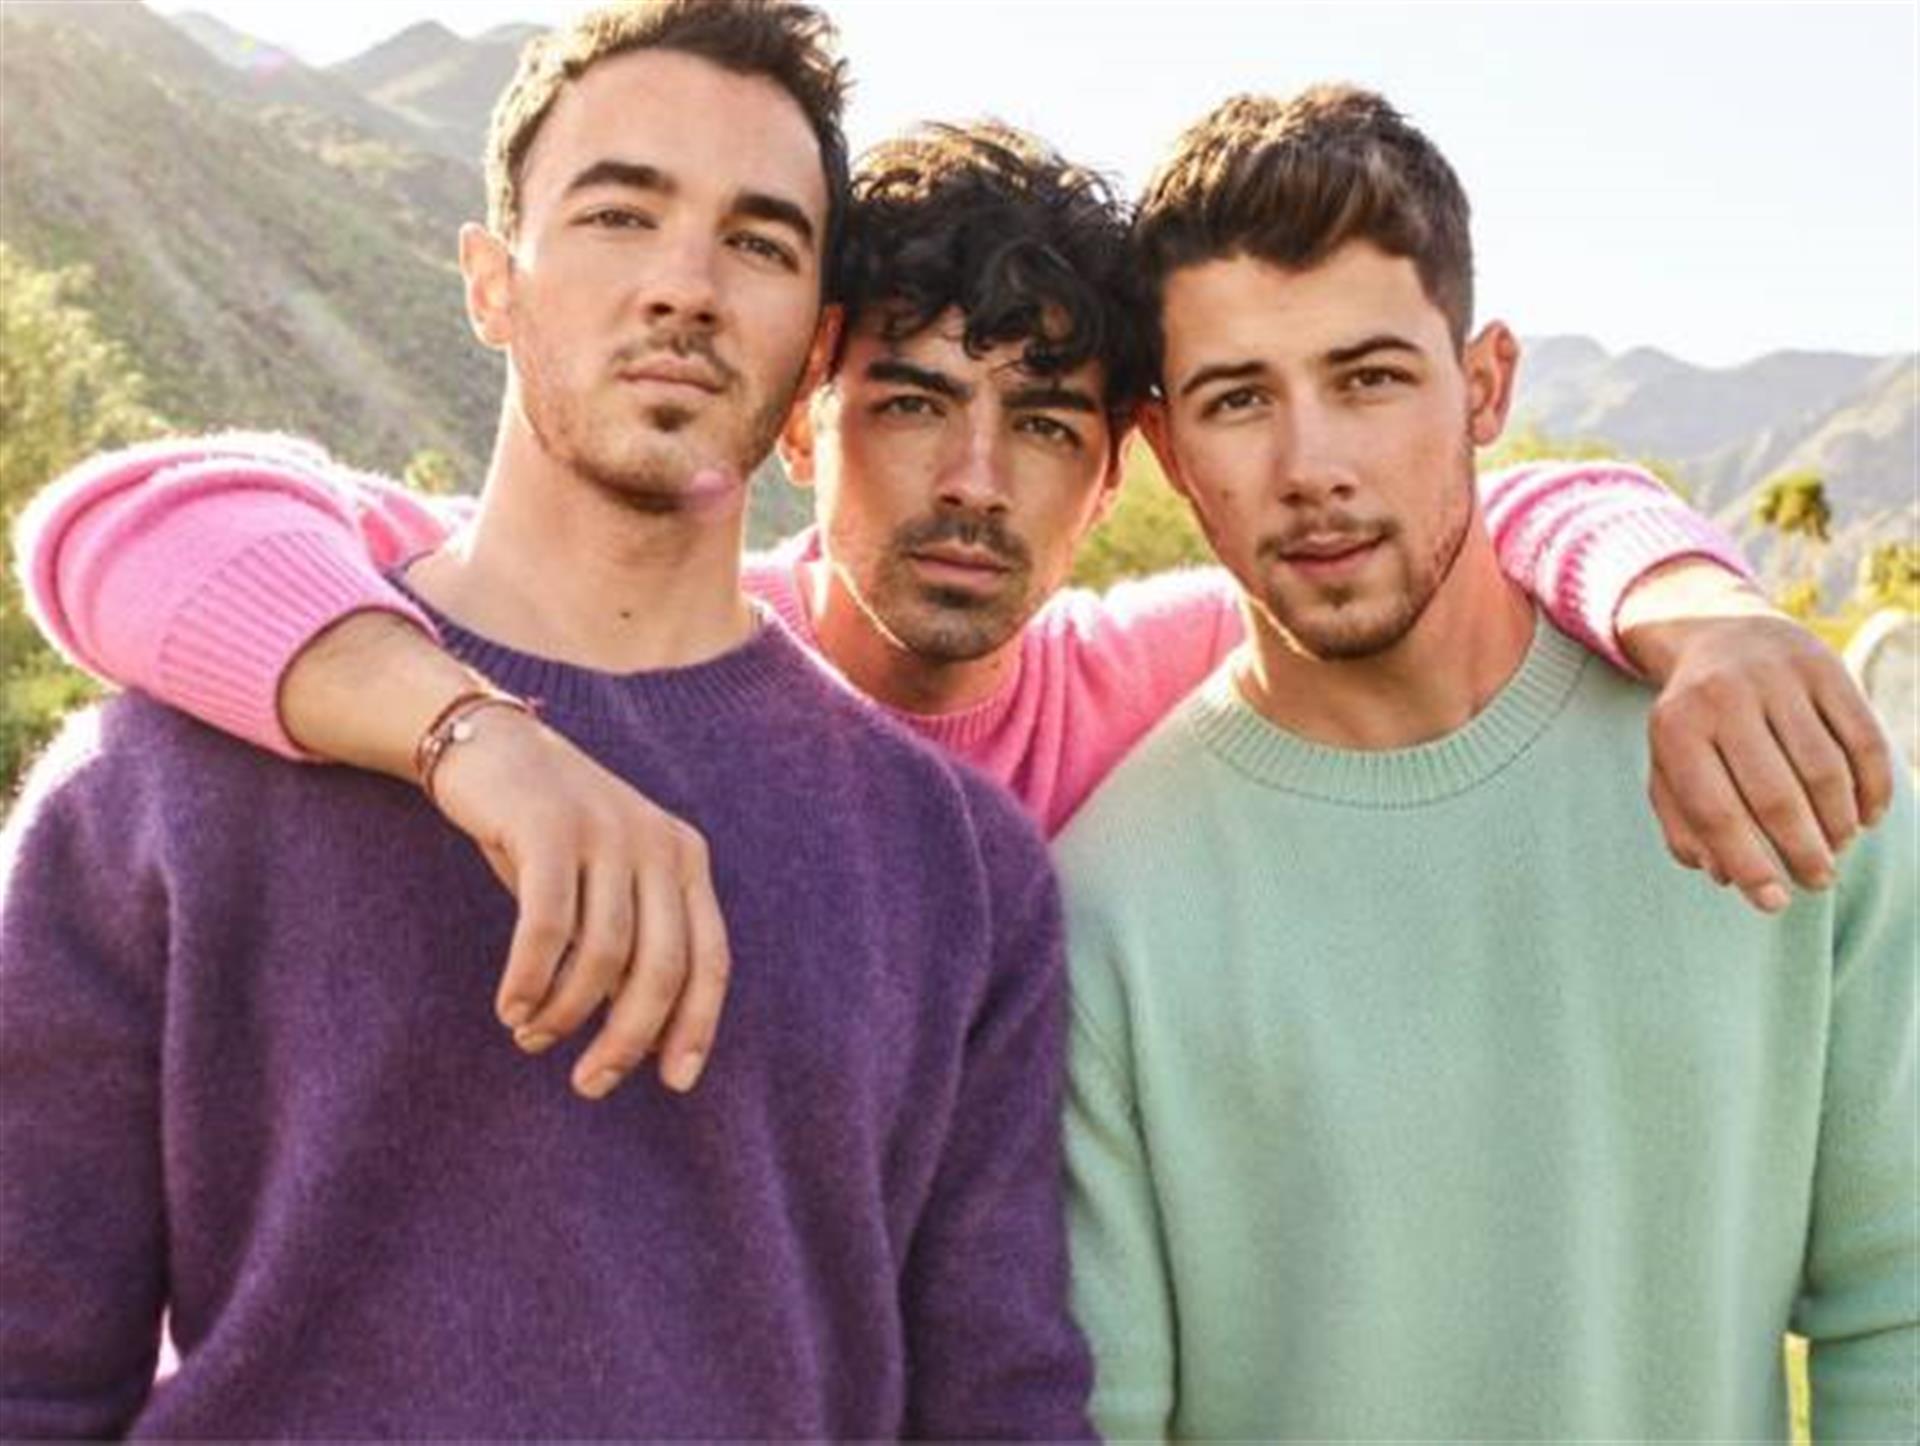 jonas-brothers-t-shirts-official-merch